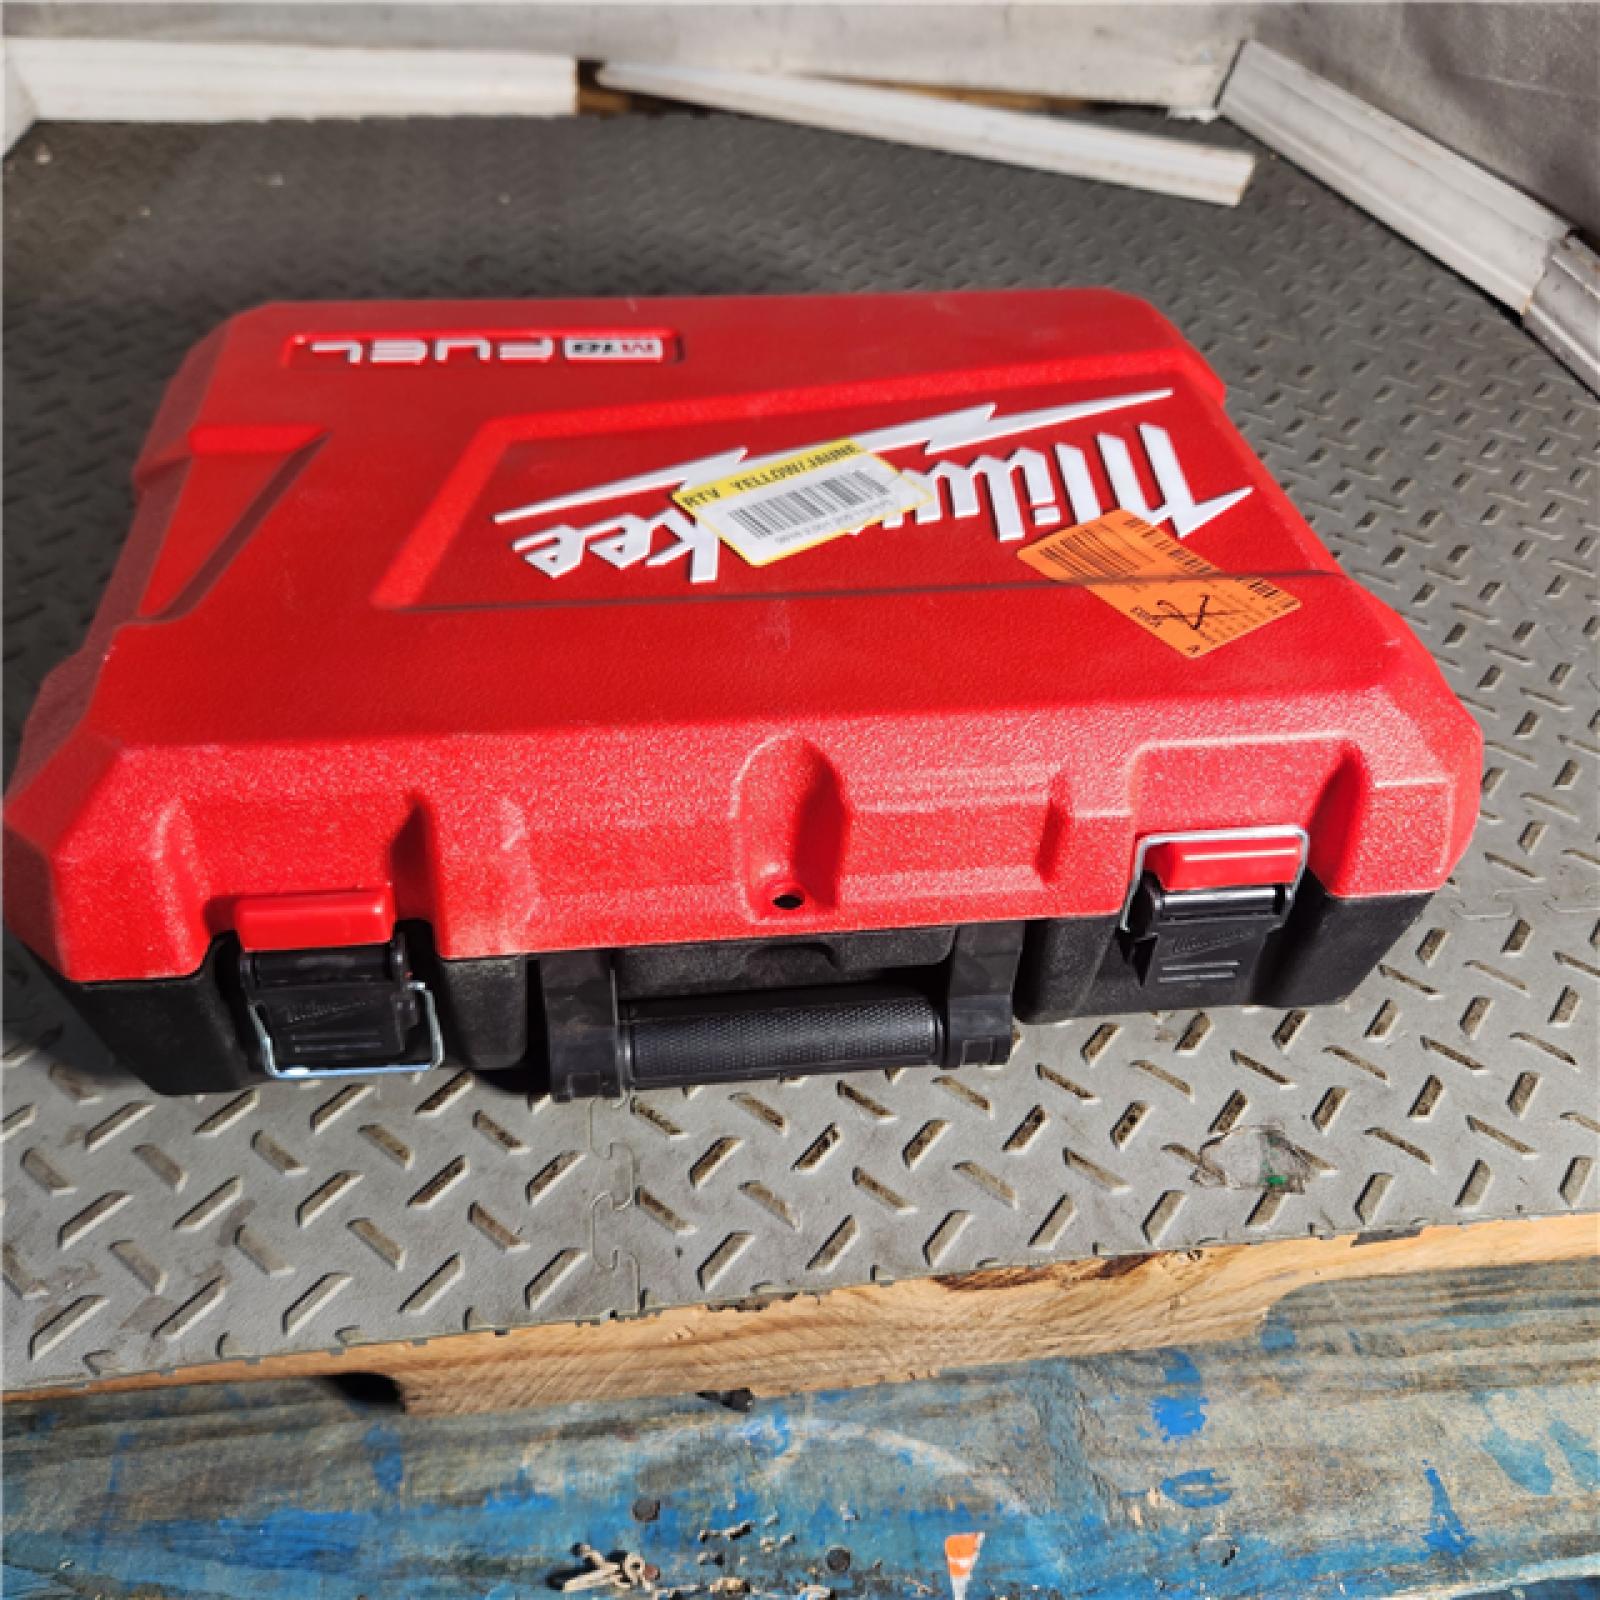 Houston location- AS-IS Milwaukee 2904-22 Hammer Drill Driver Kit with Batteries  Charger & Tool Case  Red